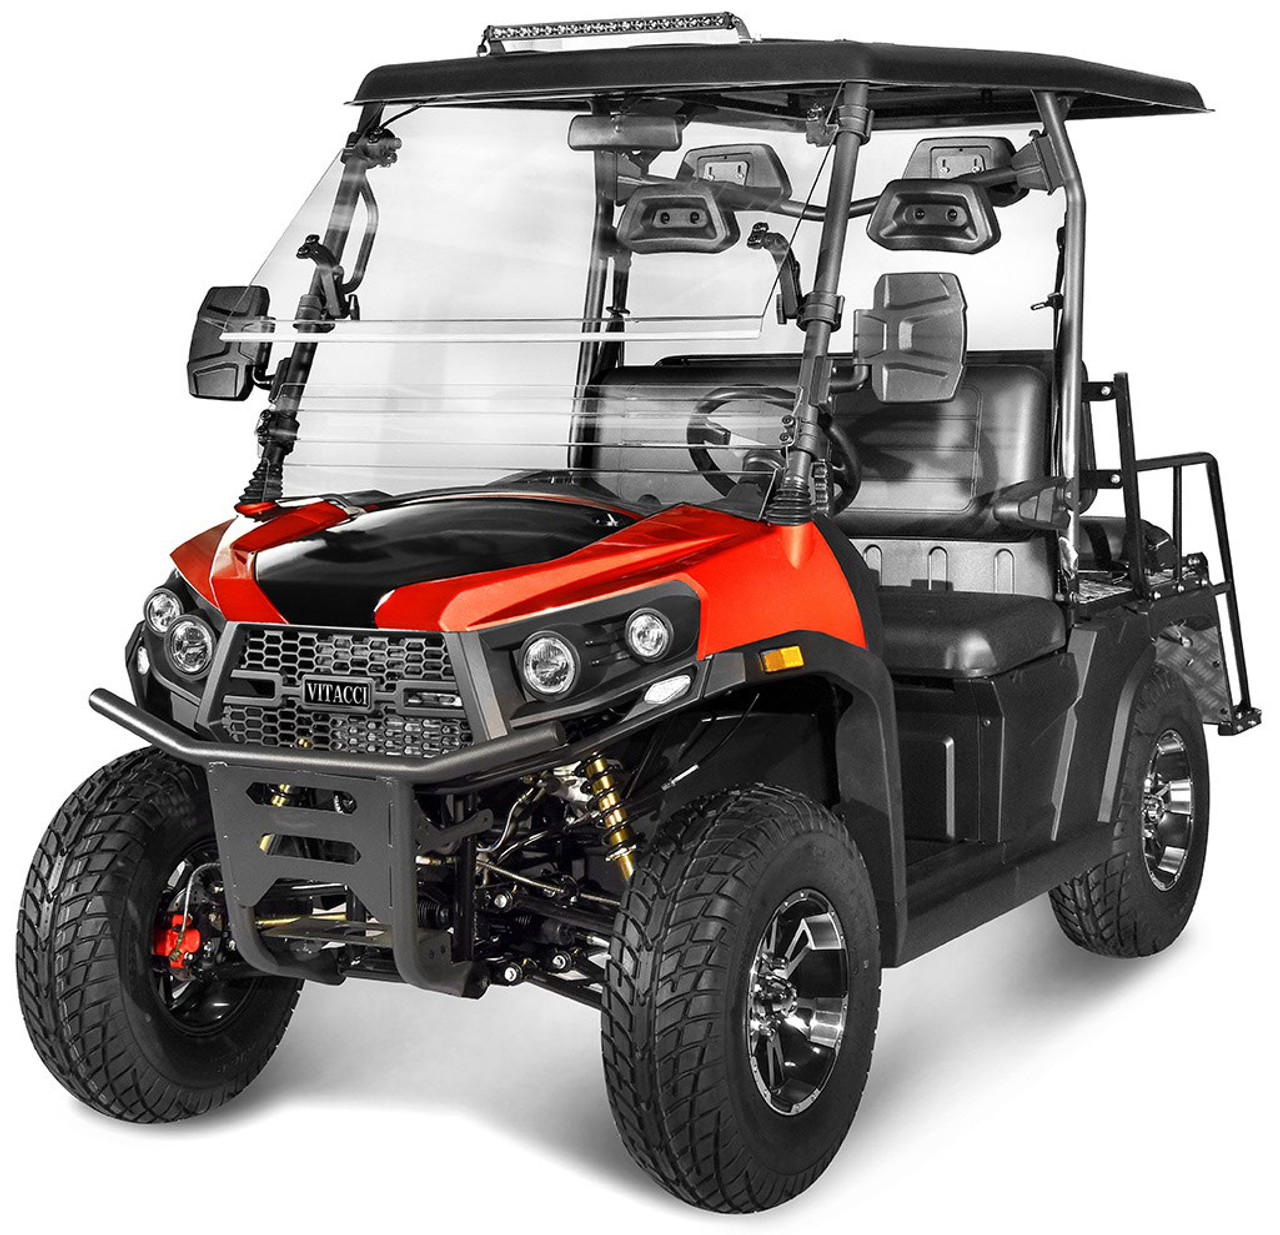 NEW VITACCI ELECTRIC GOLF CART ROVER AUTOMATIC COMES WITH LED BAR WINDSHIELD  - RED